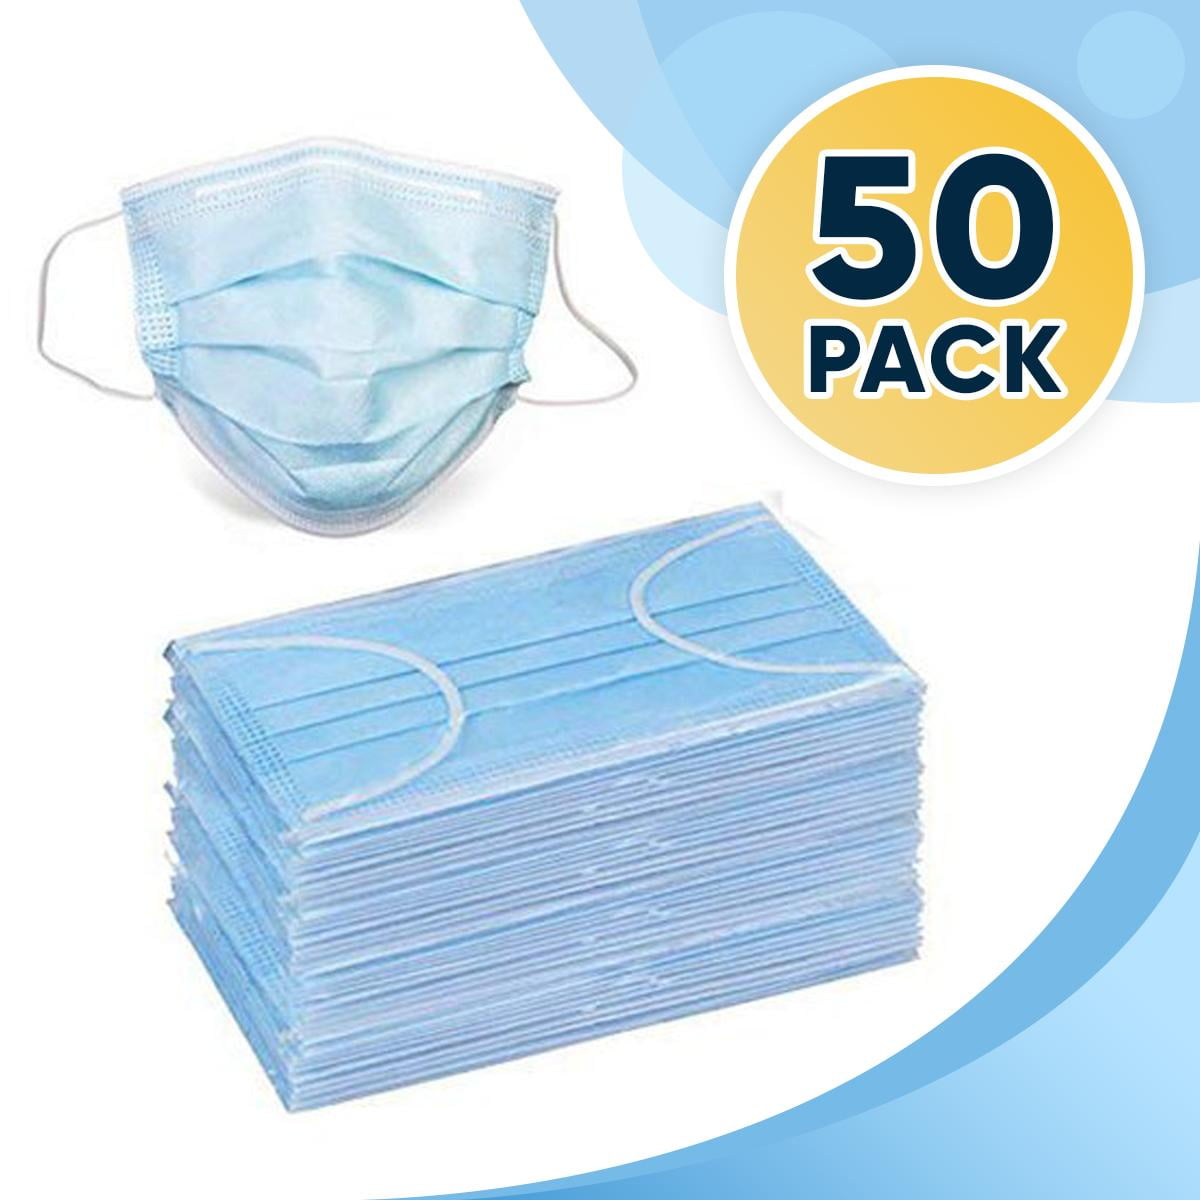 50PCS Disposable Face Masks for Kids 3-Ply Breathable Cute Safety Face  Masks with Elastic Earloop for Girls Boys - China Kids Mask, 3-Ply Face  Mask